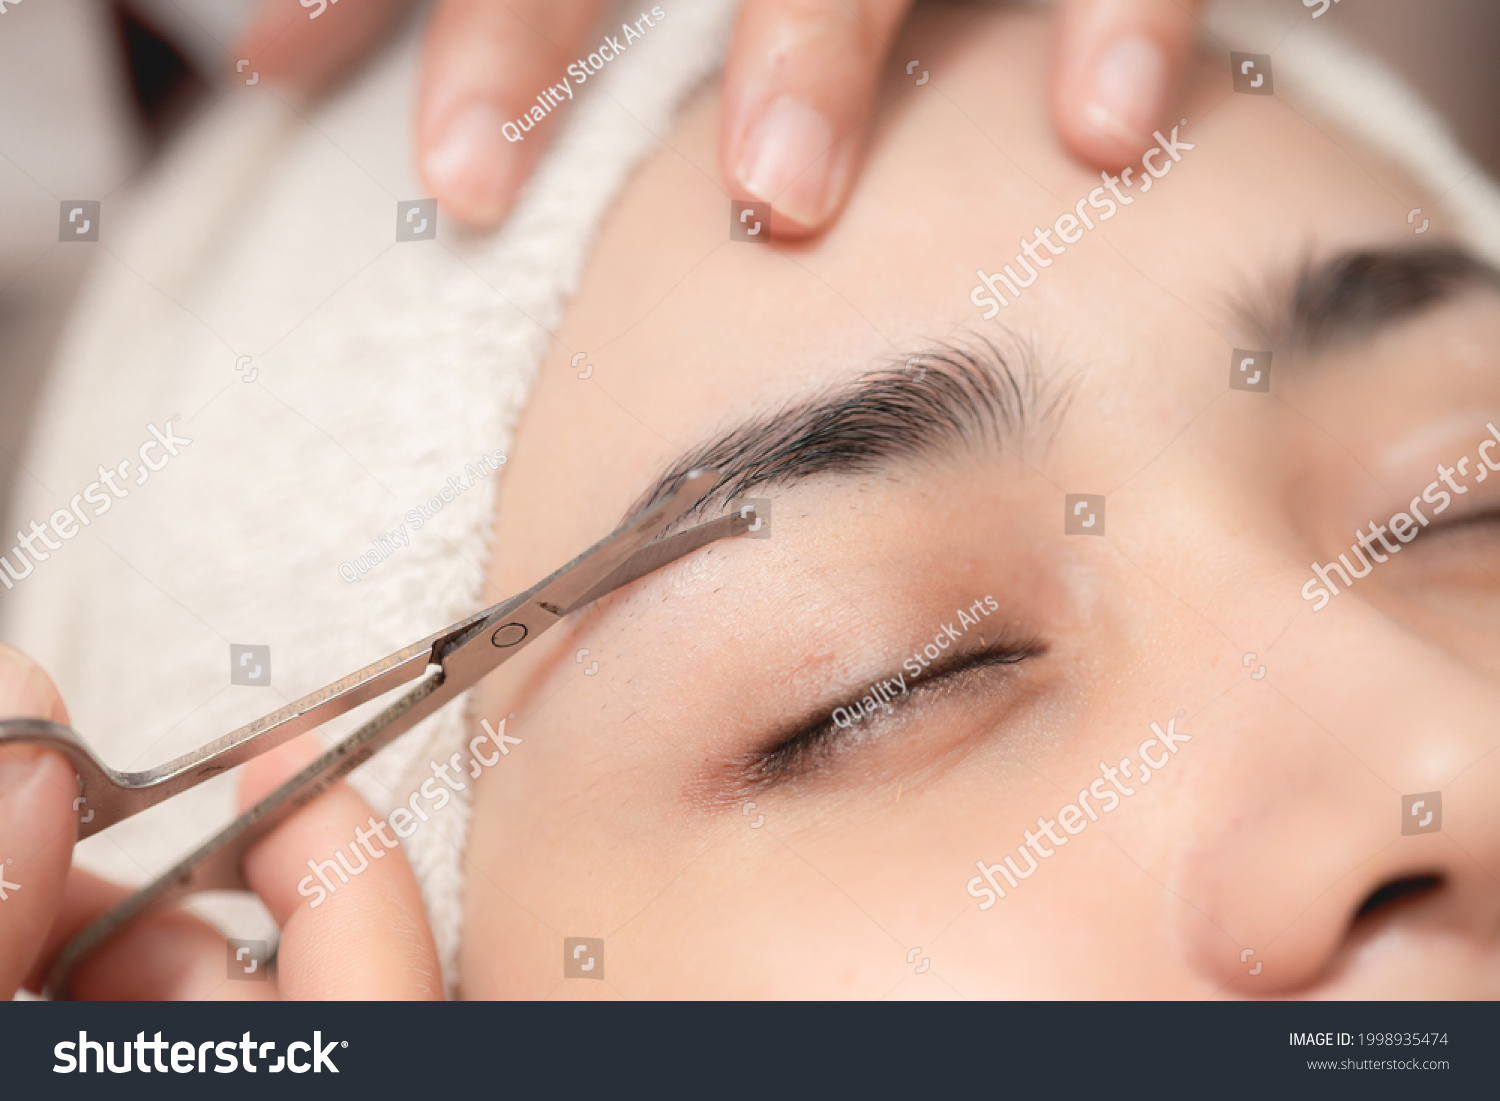 Eyebrows trimming service in spa salon, Face hair cutting and trim with small scissor tool for facial beauty women closeup. #1998935474